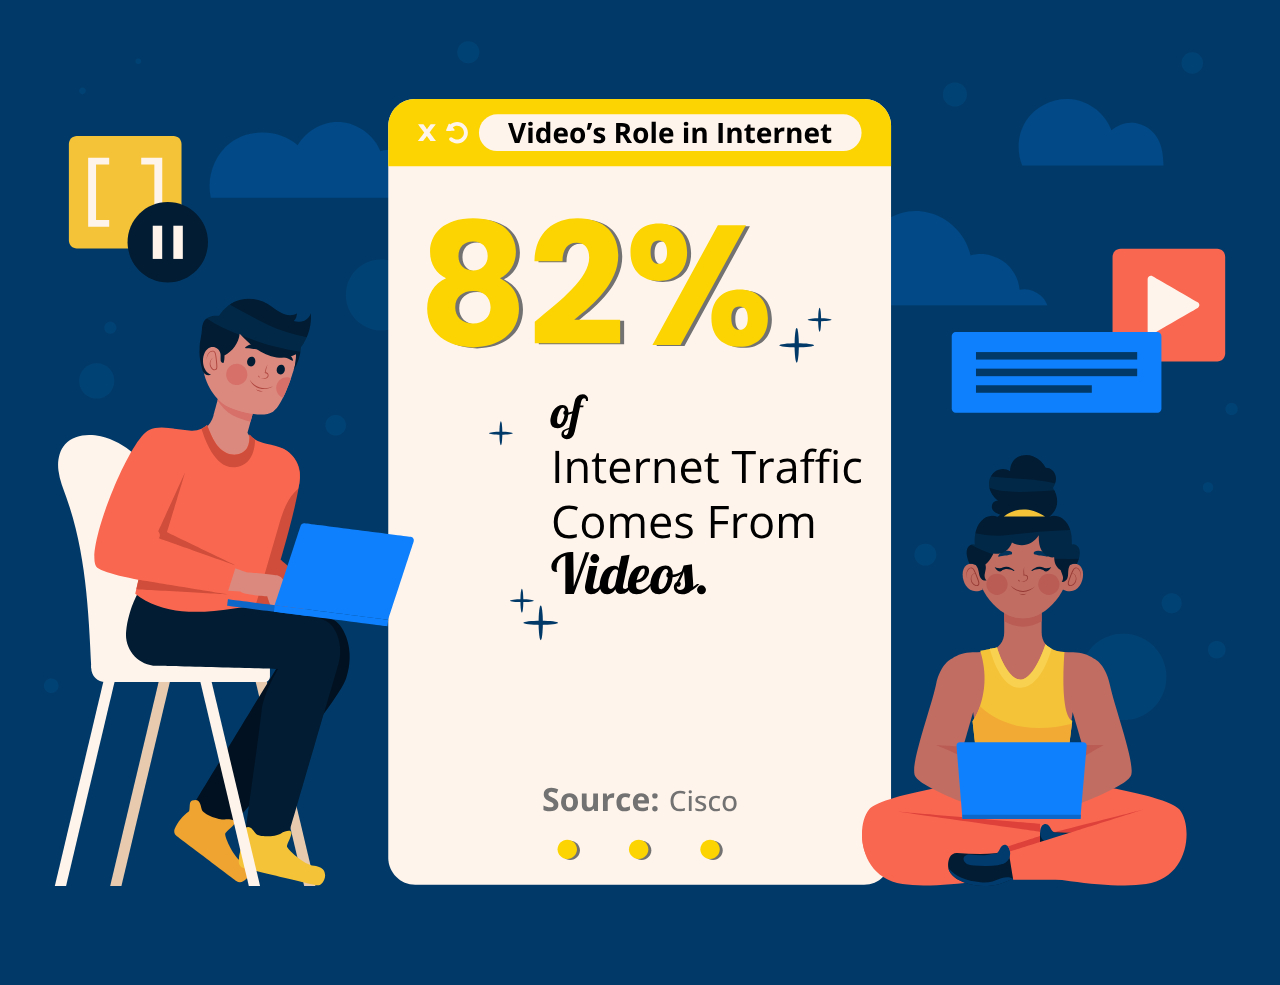 Video's Role in Internet